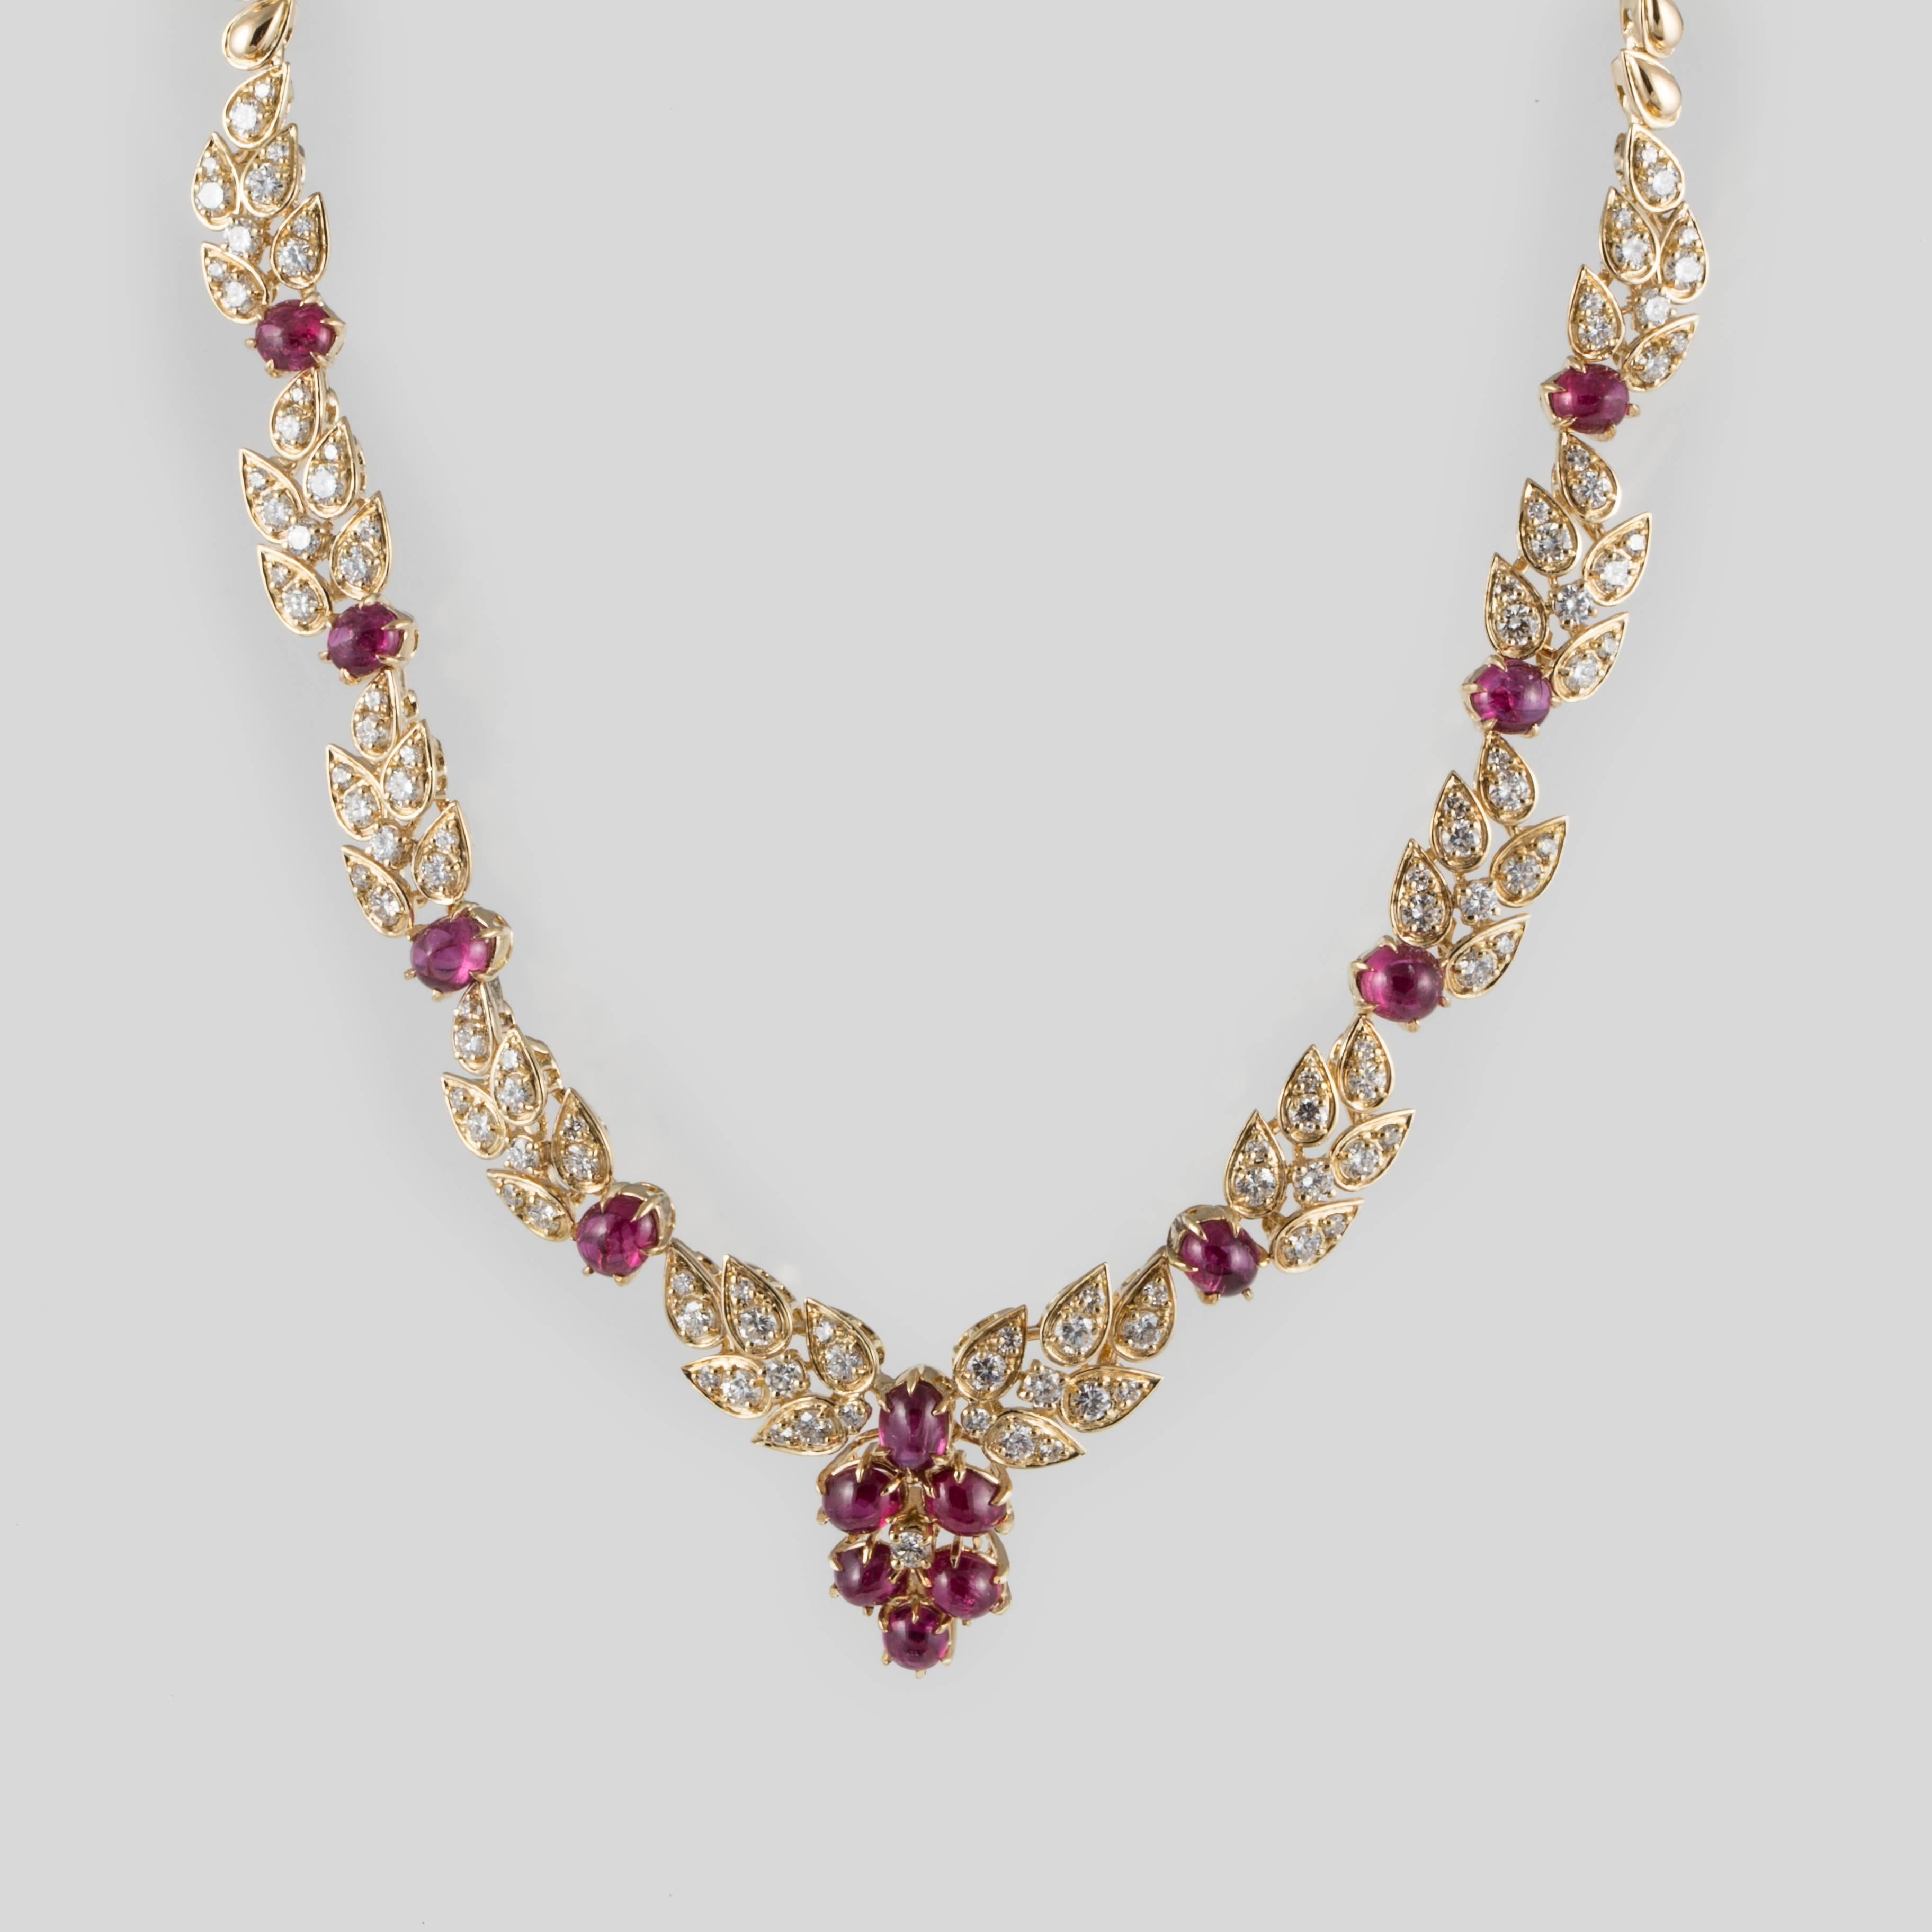 Adler necklace in 18K yellow gold featuring cabochon rubies accented by diamonds.  Marked 